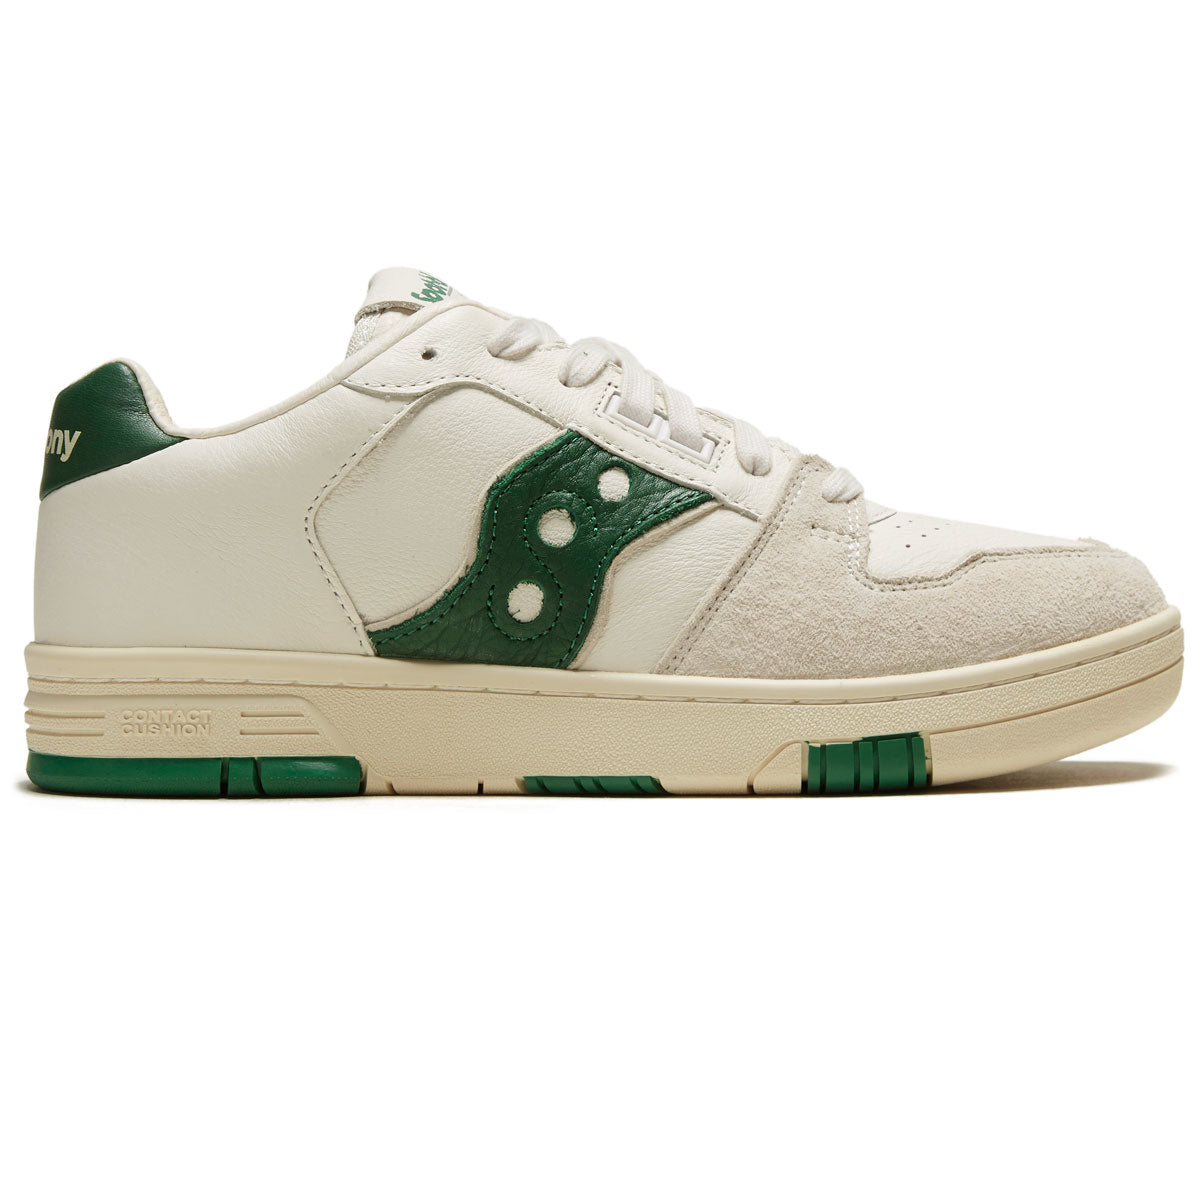 Saucony Sonic Low Shoes - Beige/Green image 1